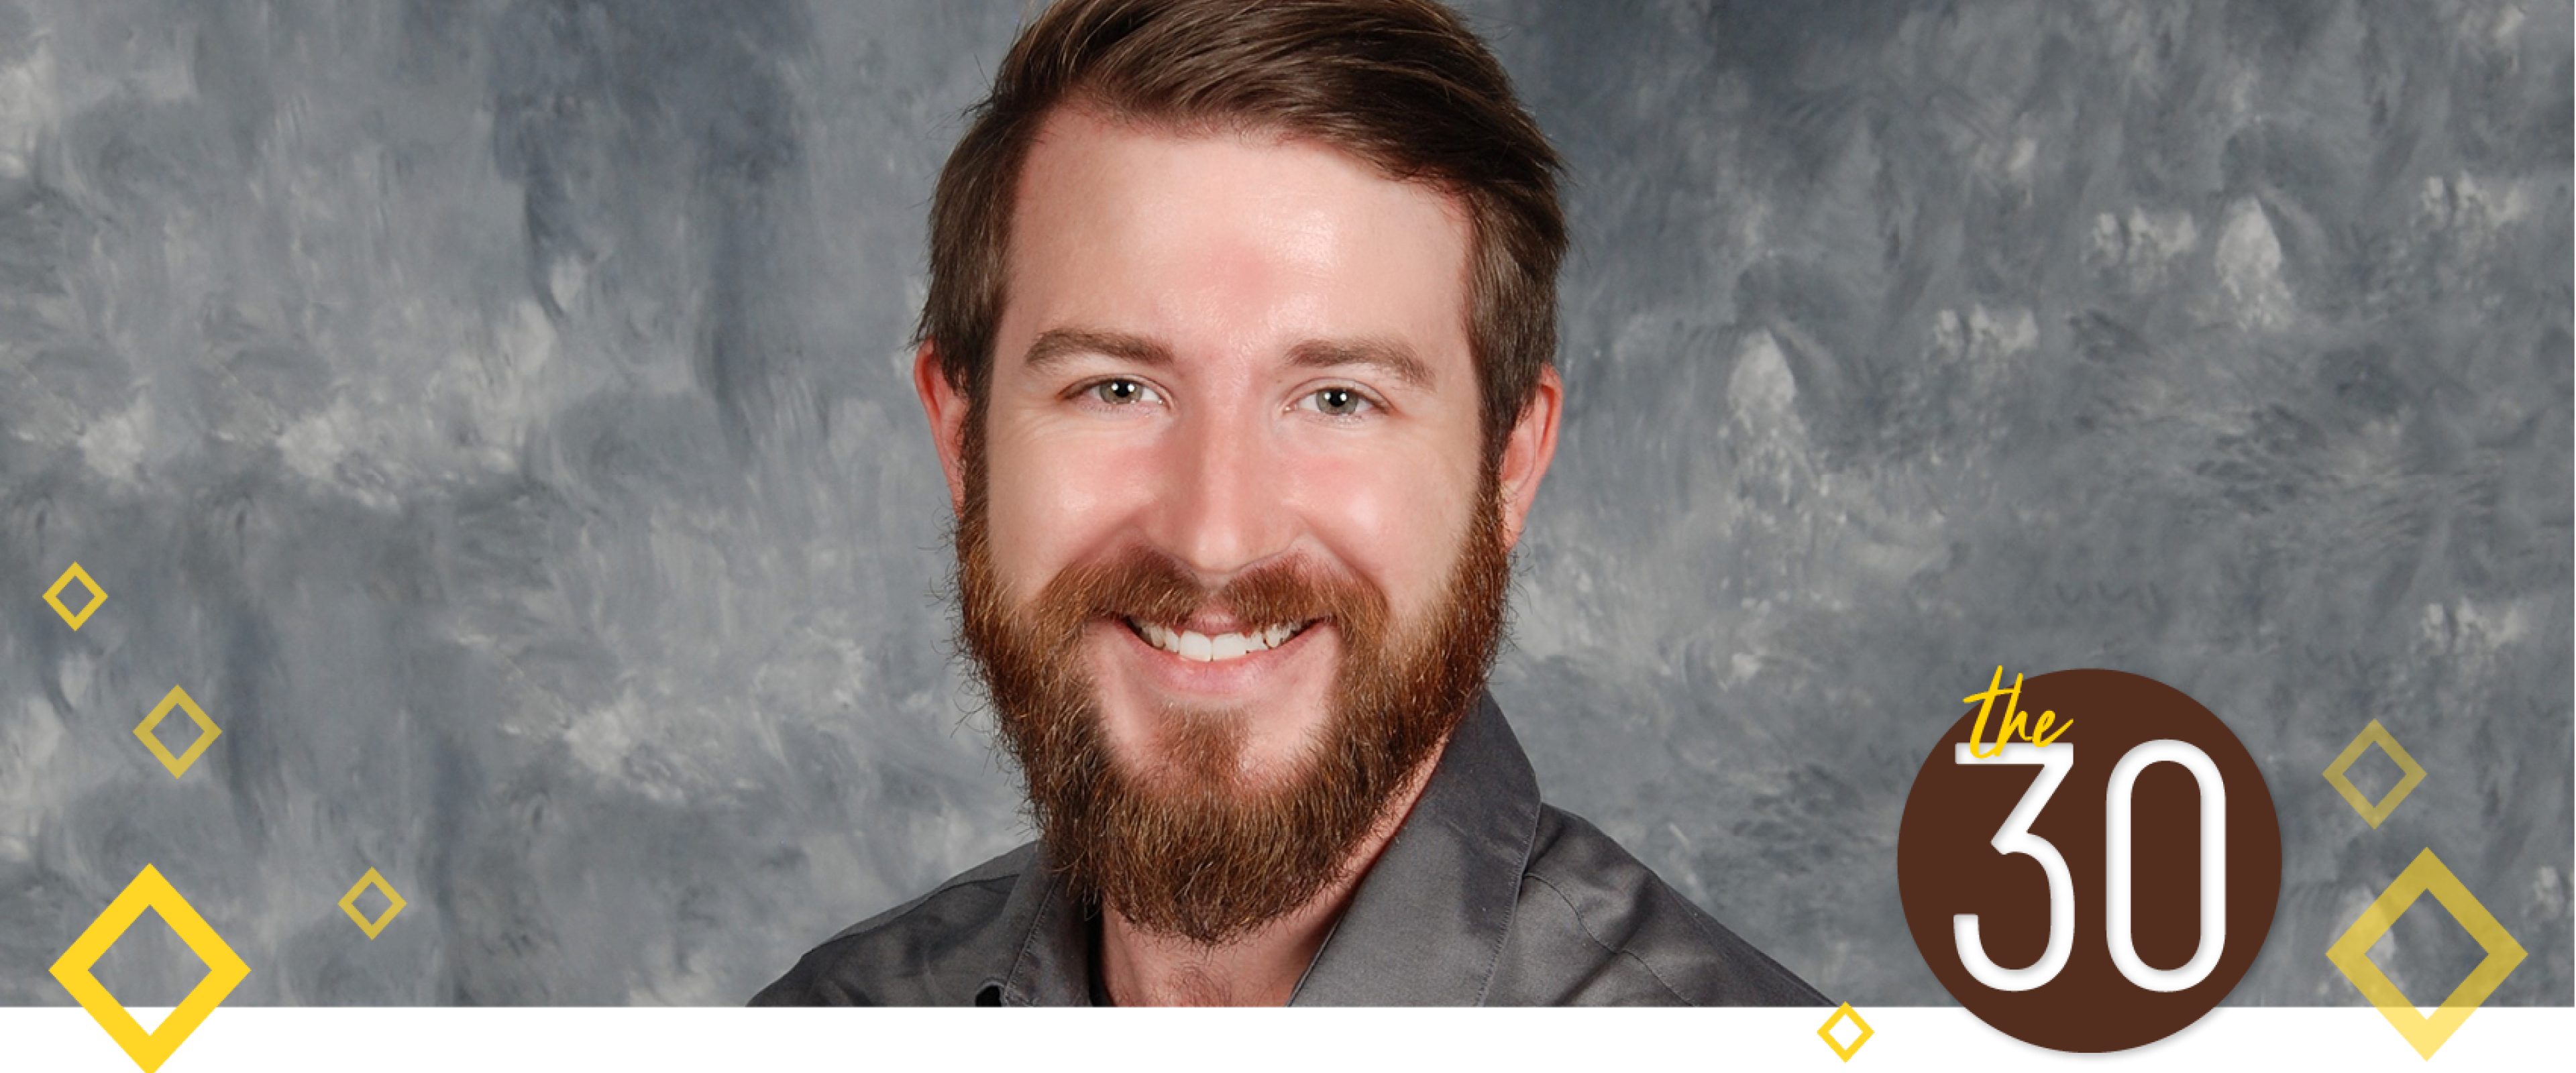 Collin Cronin is smiling and wearing a grey shirt. He is standing in front of a painted grey background.